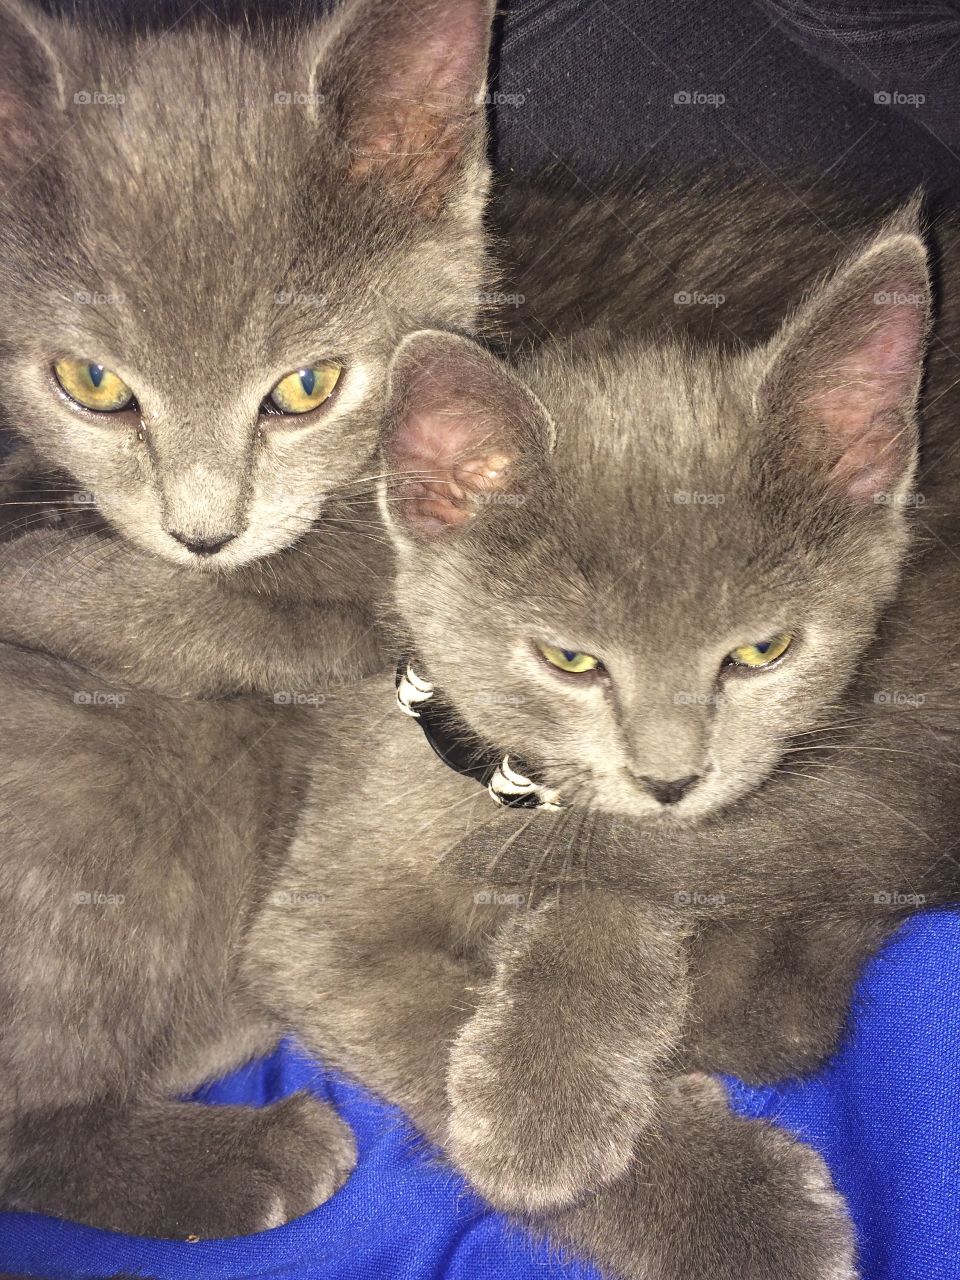 Twin Kitties. Meet the newest members of our family, Dink and Doink